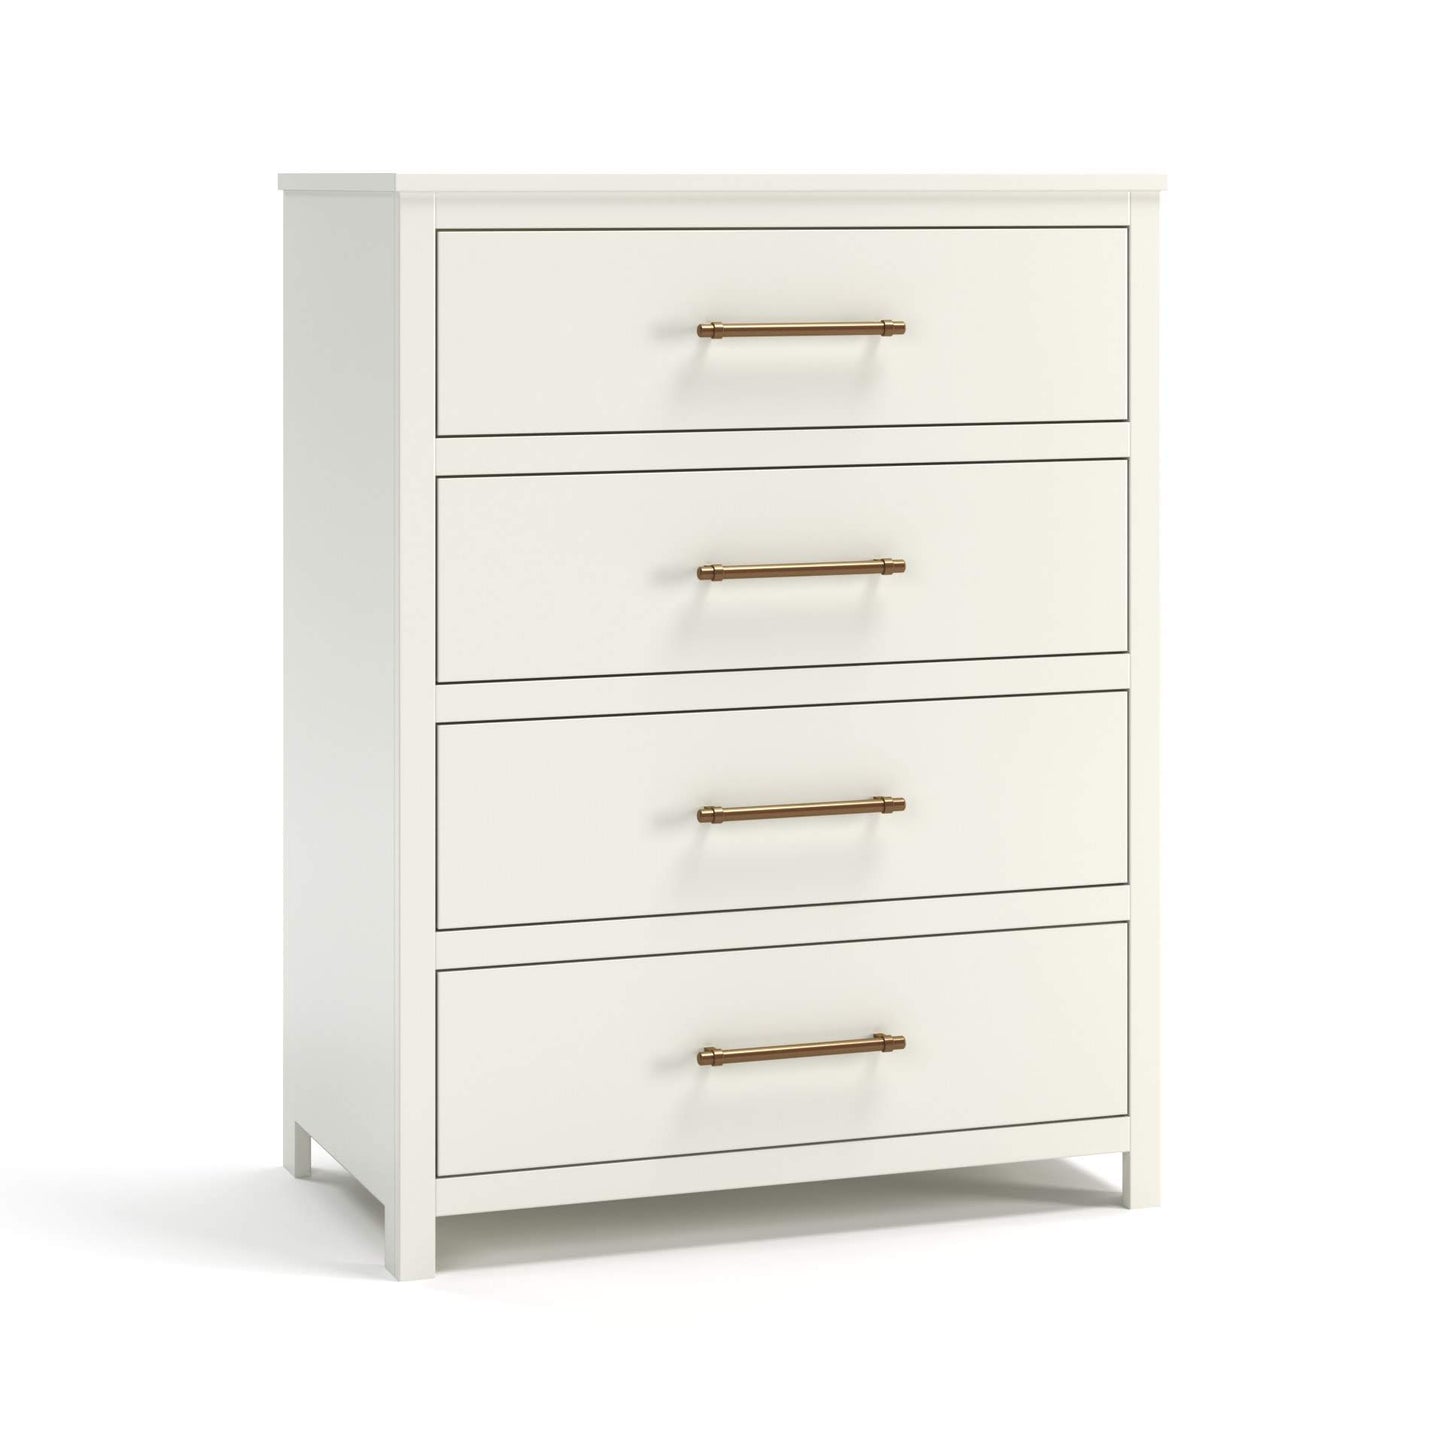 Acadia Tremont Chest with four drawers, built in birch. Shown in White finish.